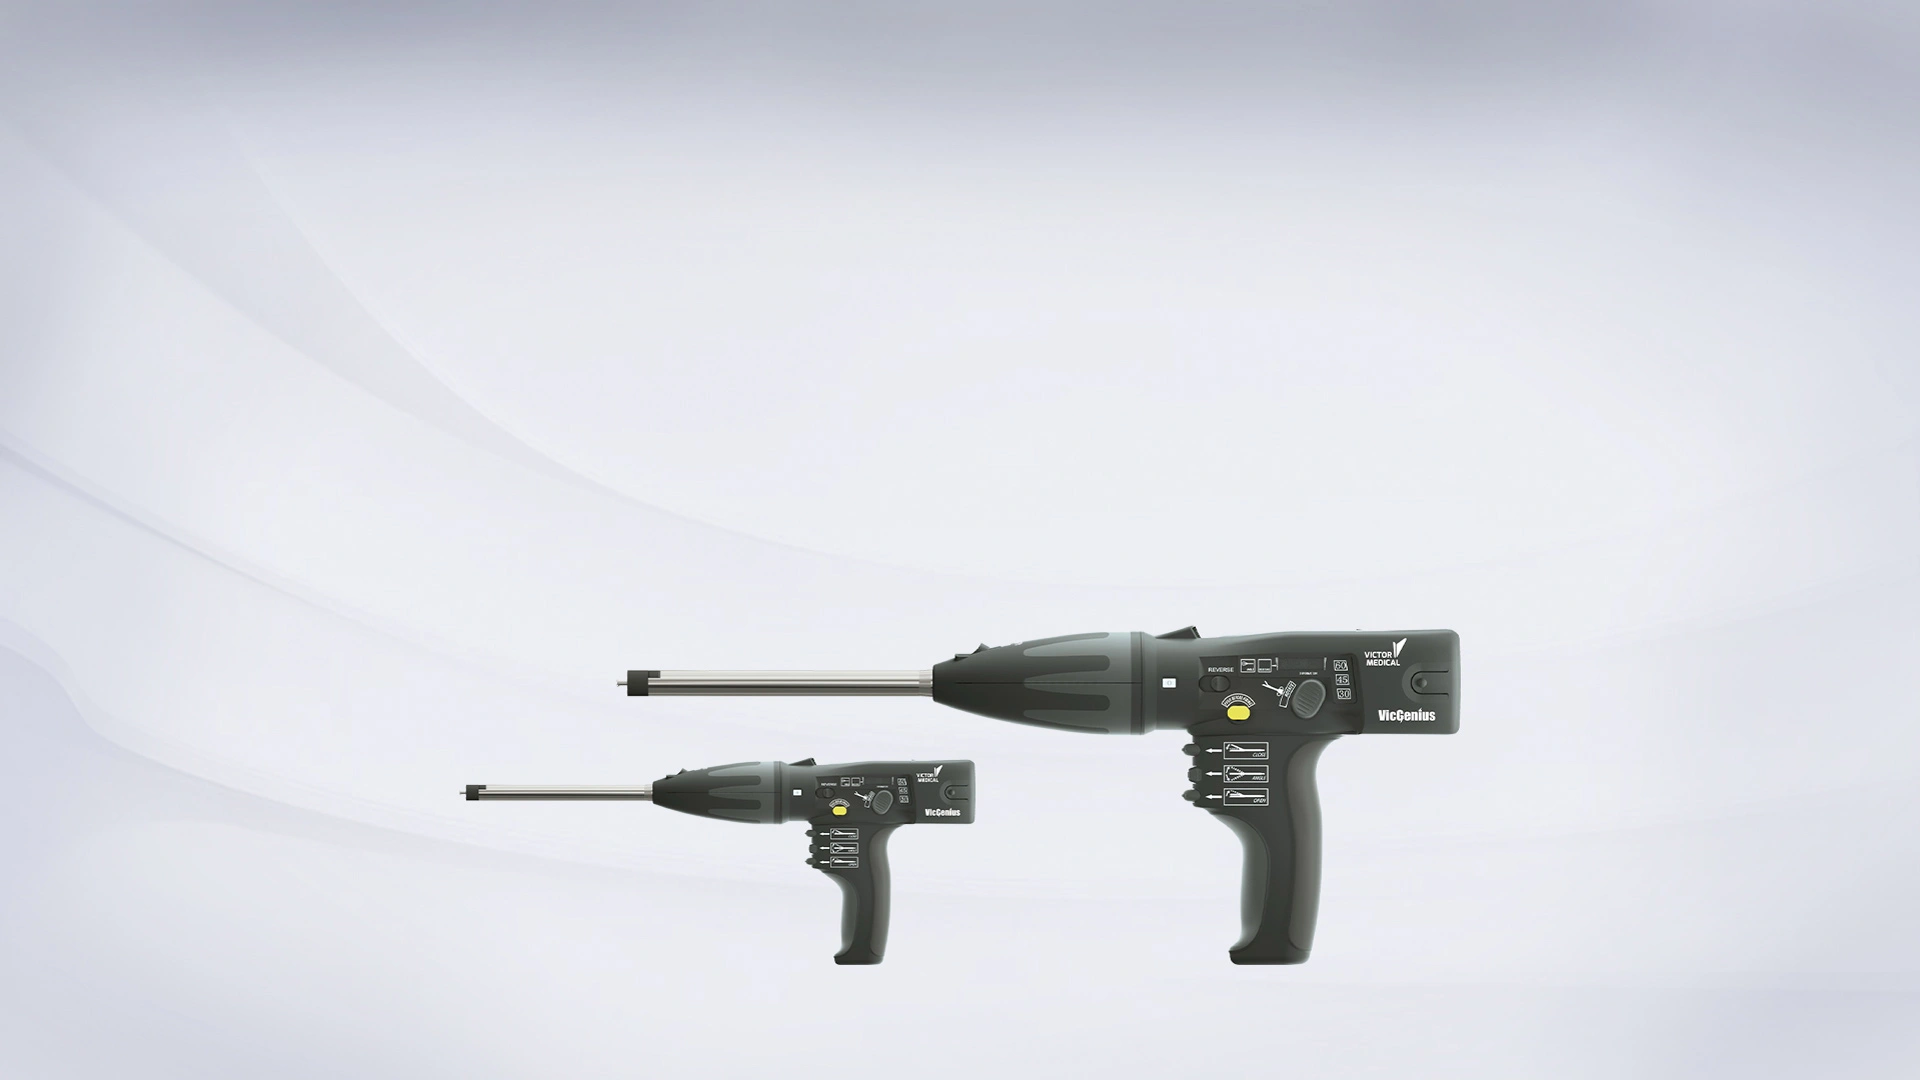 VICTOR MEDICALHAS DEVELOPED TWO SMART POWERED ENDOSCOPIC LINEAR CUTTER STAPLERS